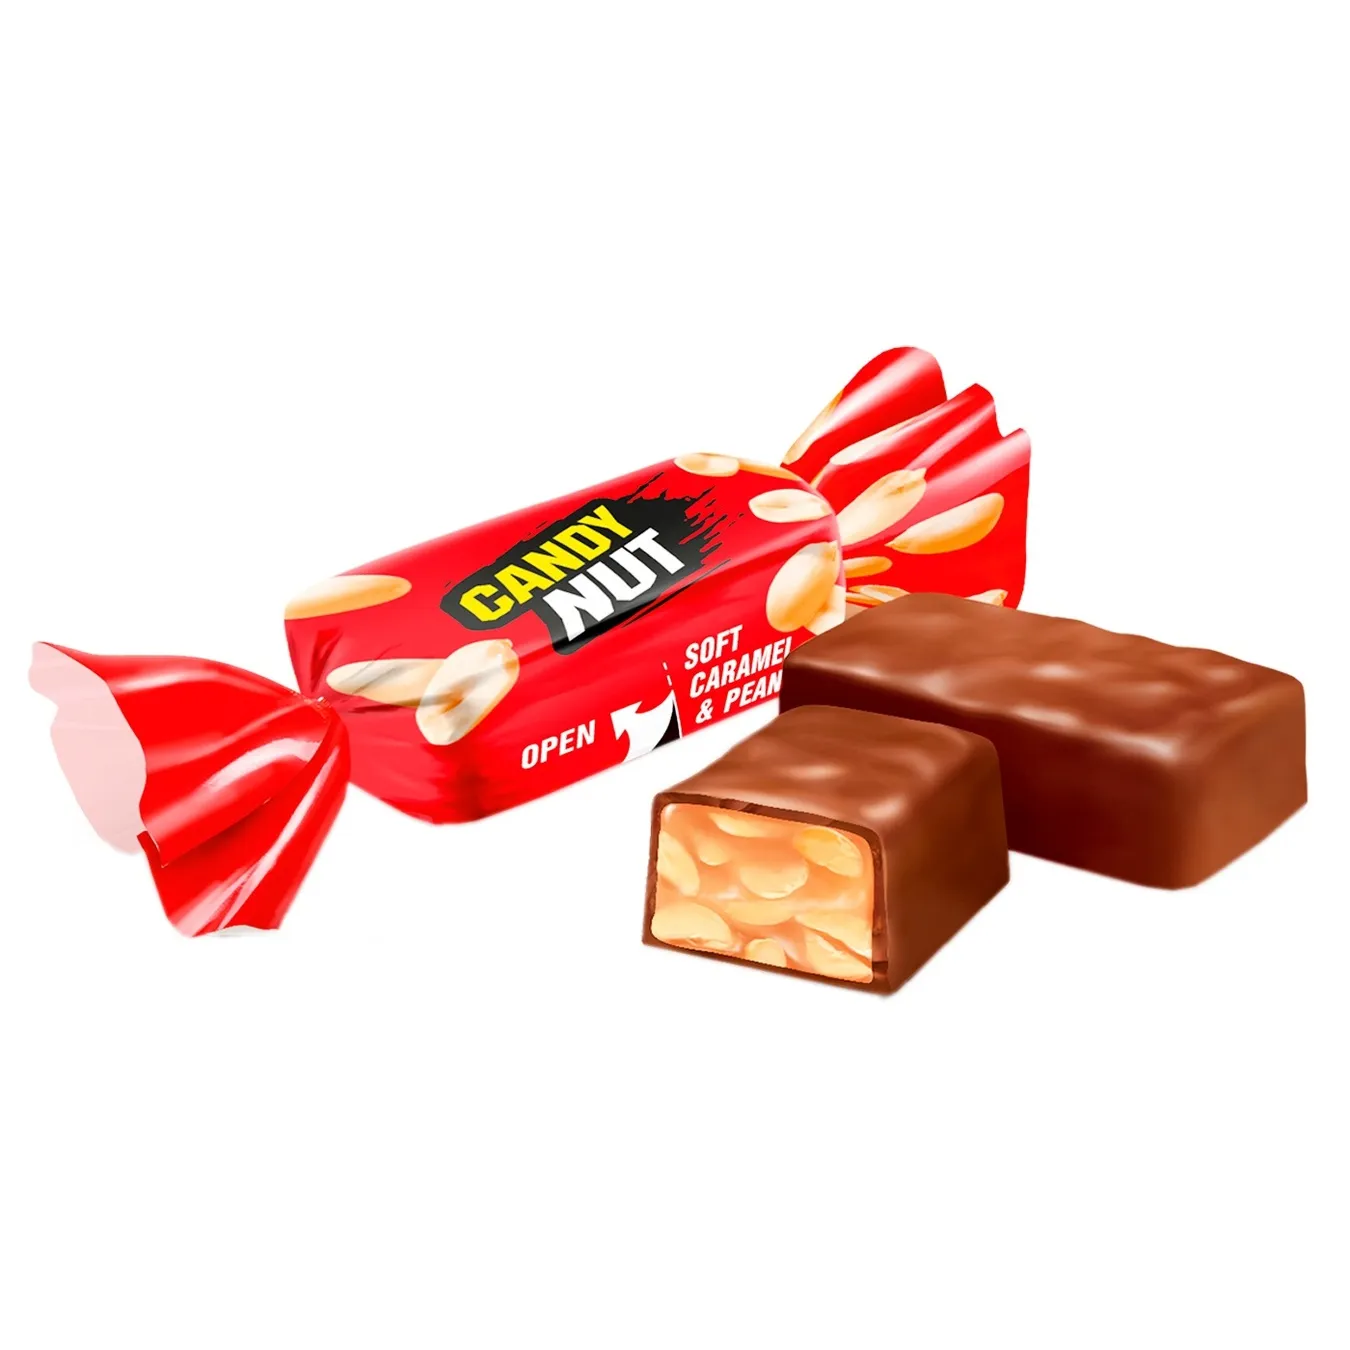 Roshen Candy Nut Caramel With Peanuts Candies